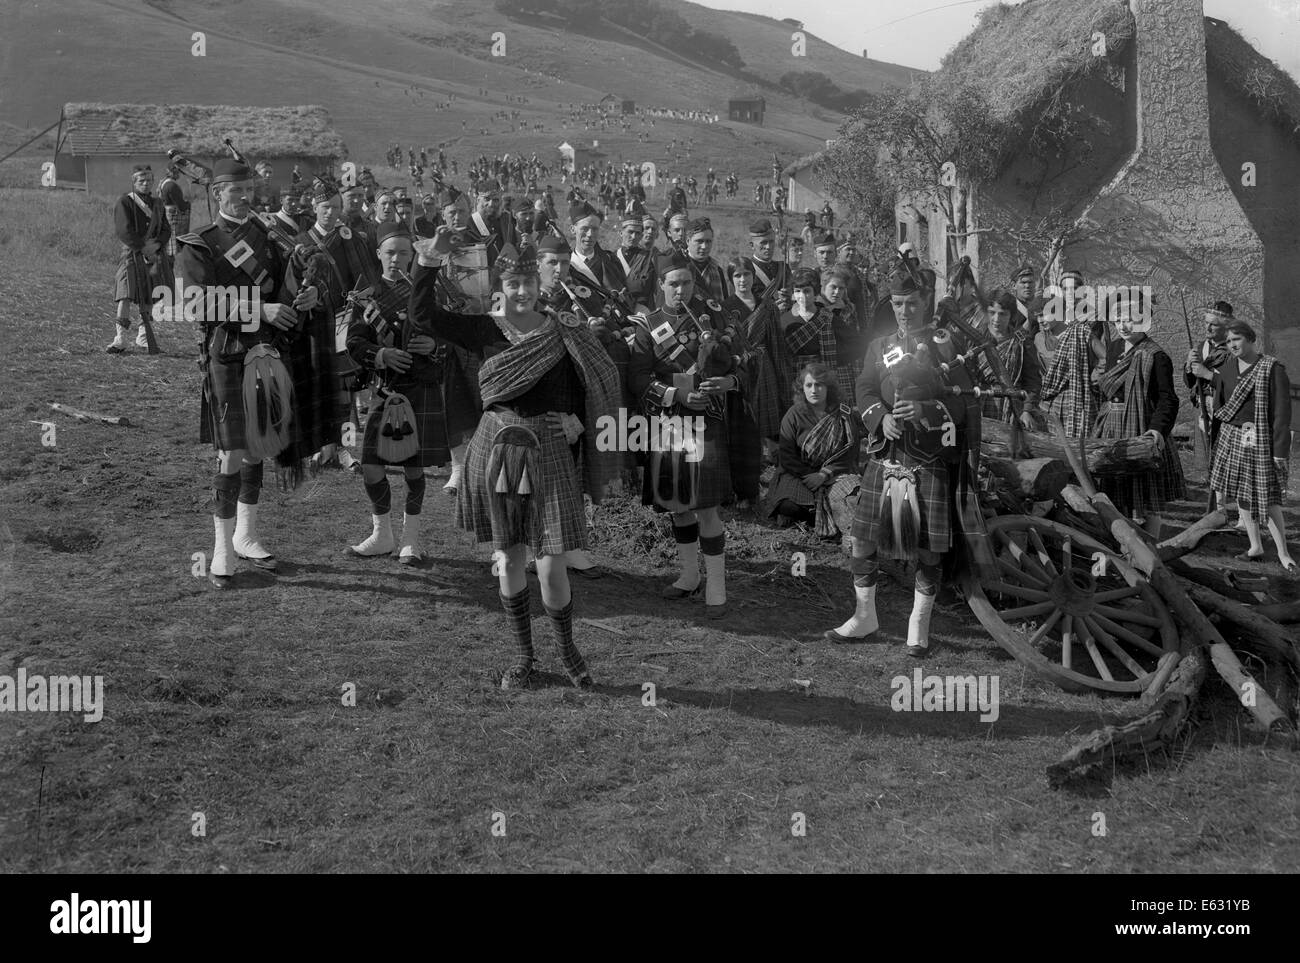 1920s SILENT MOVIE STILL WOMAN IN KILT LEADING BAND OF SCOTSMEN IN UNIFORMS PLAYING BAGPIPES PAST STONE COTTAGES IN HIGHLANDS Stock Photo